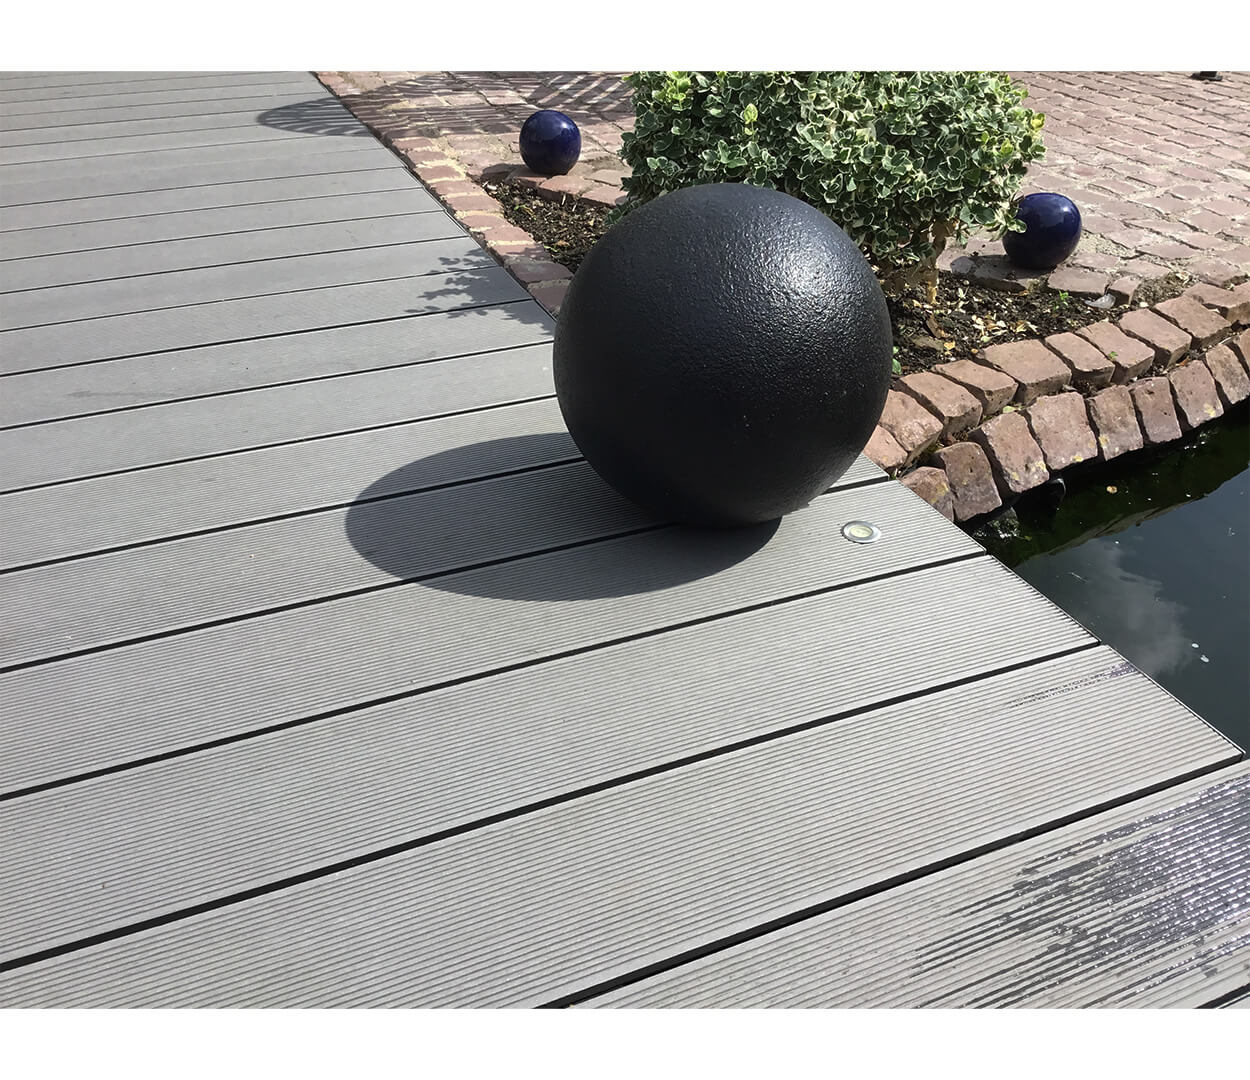 Cladco Composite Decking Boards in Stone Grey with Floral & Stone Boarder